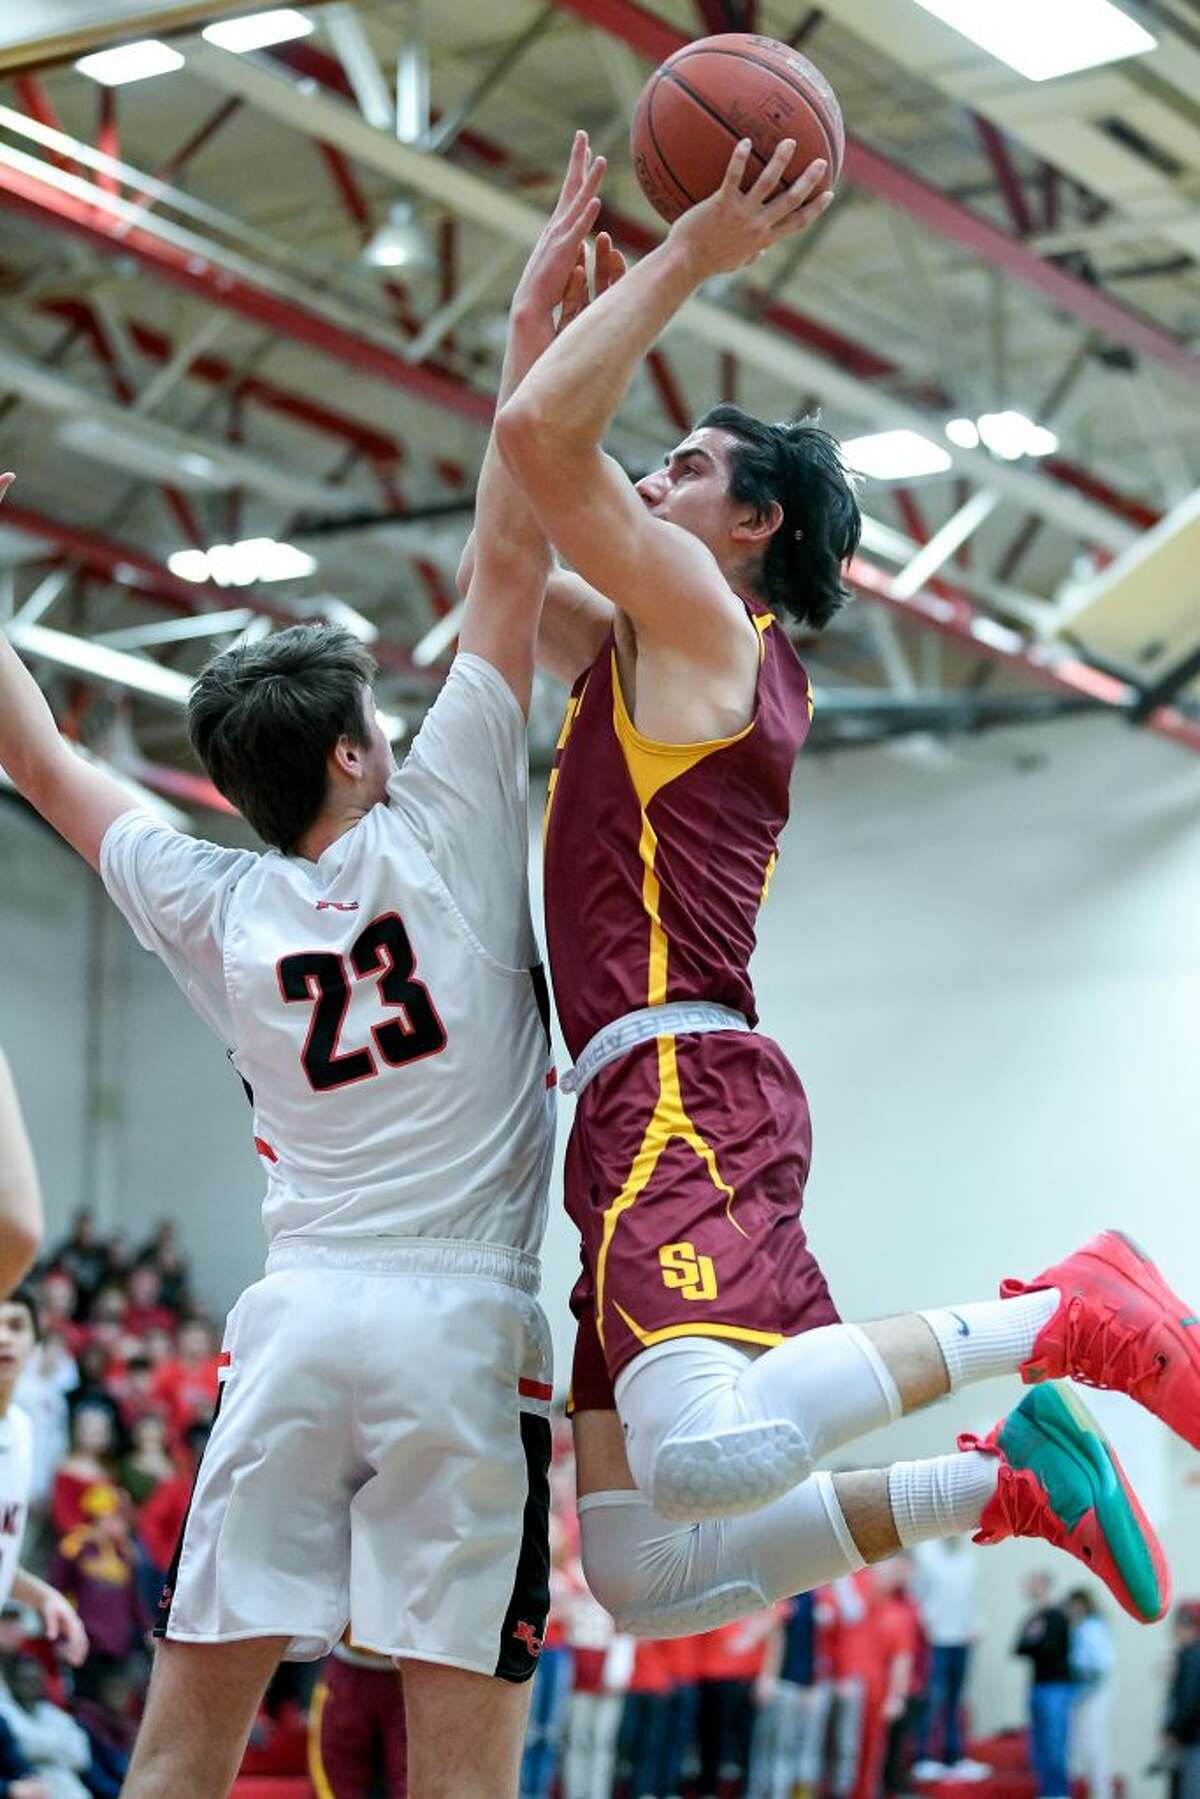 Stephen Paolini shoots a jumper over New Canaan's Jack Richardson.Photo: David G. Whitham / For Hearst Connecticut Media